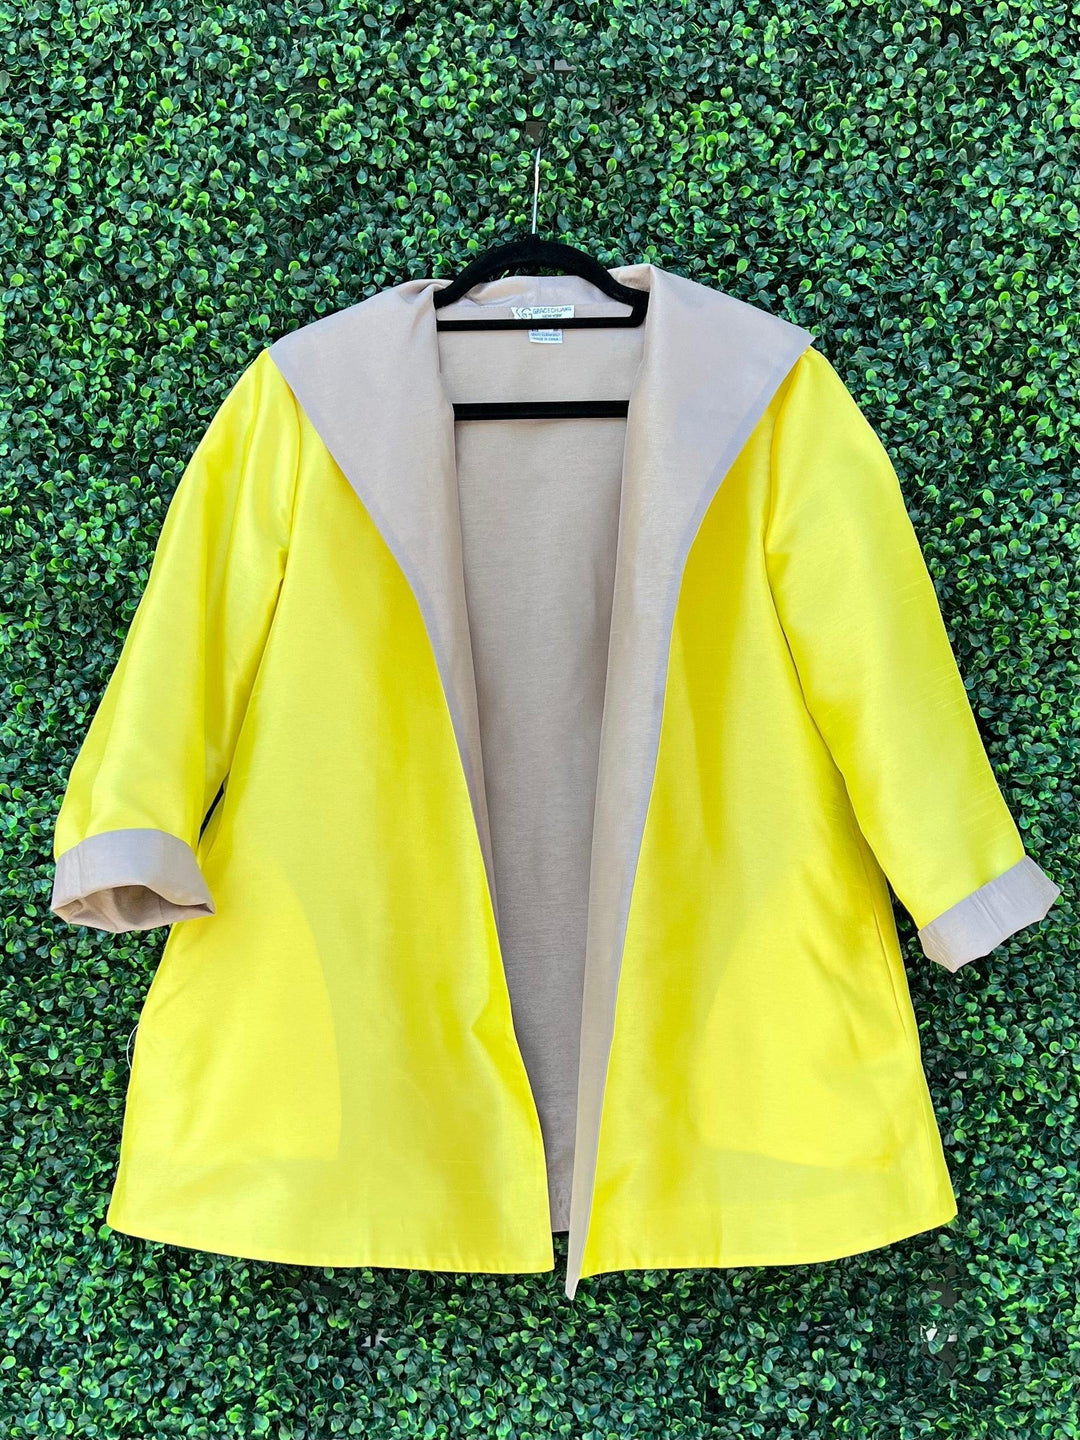 Brigh yellow women's dressy jacket from Tres Chic women's boutique